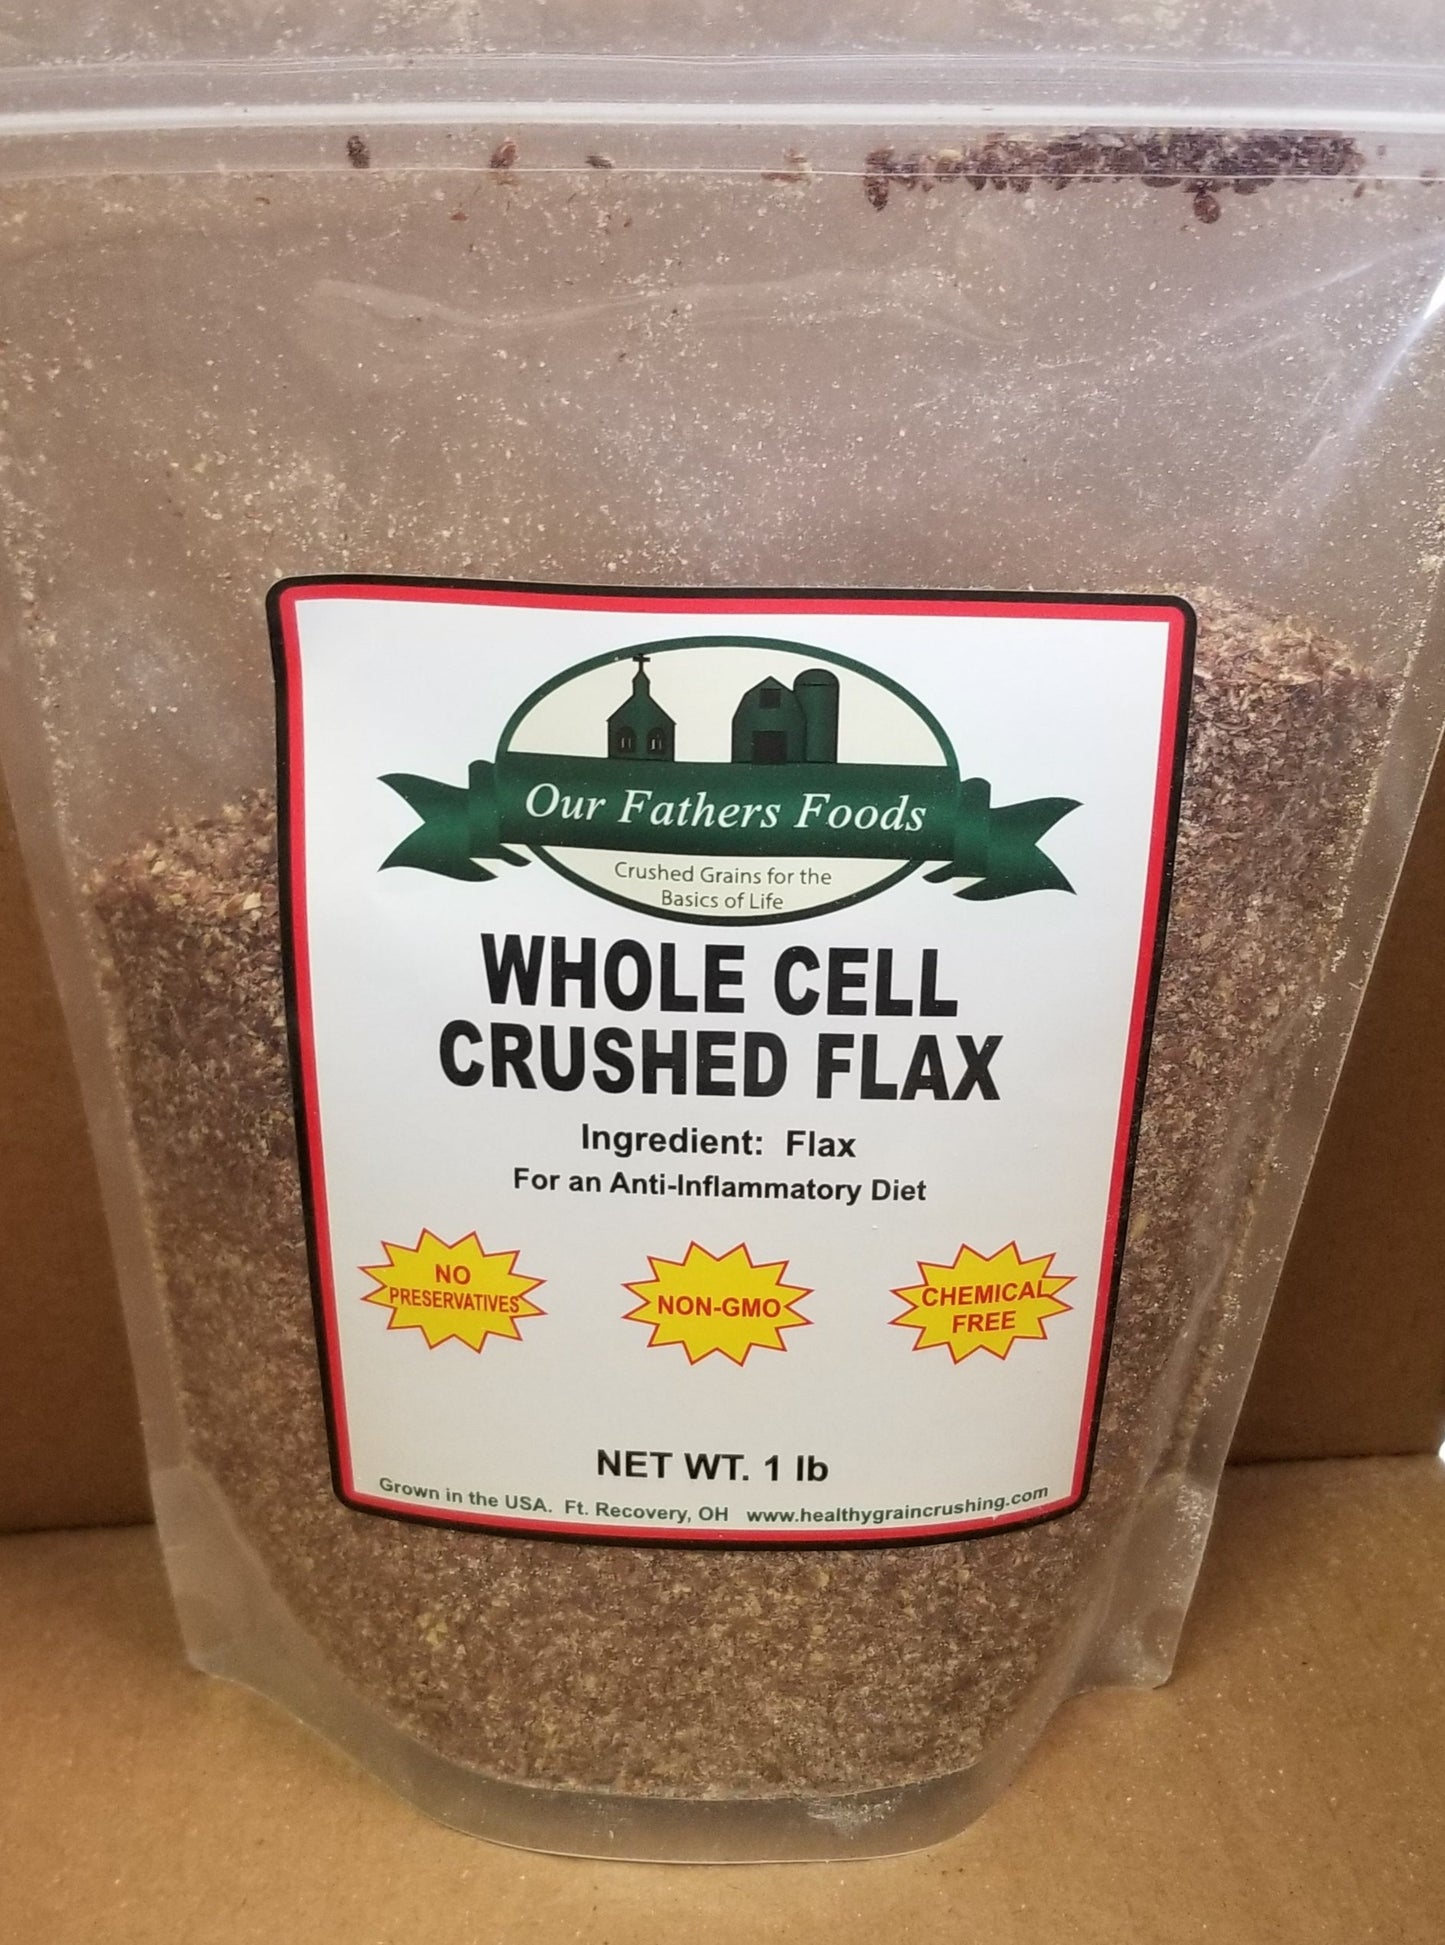 Whole Cell Crushed Flax, His Saving Grains